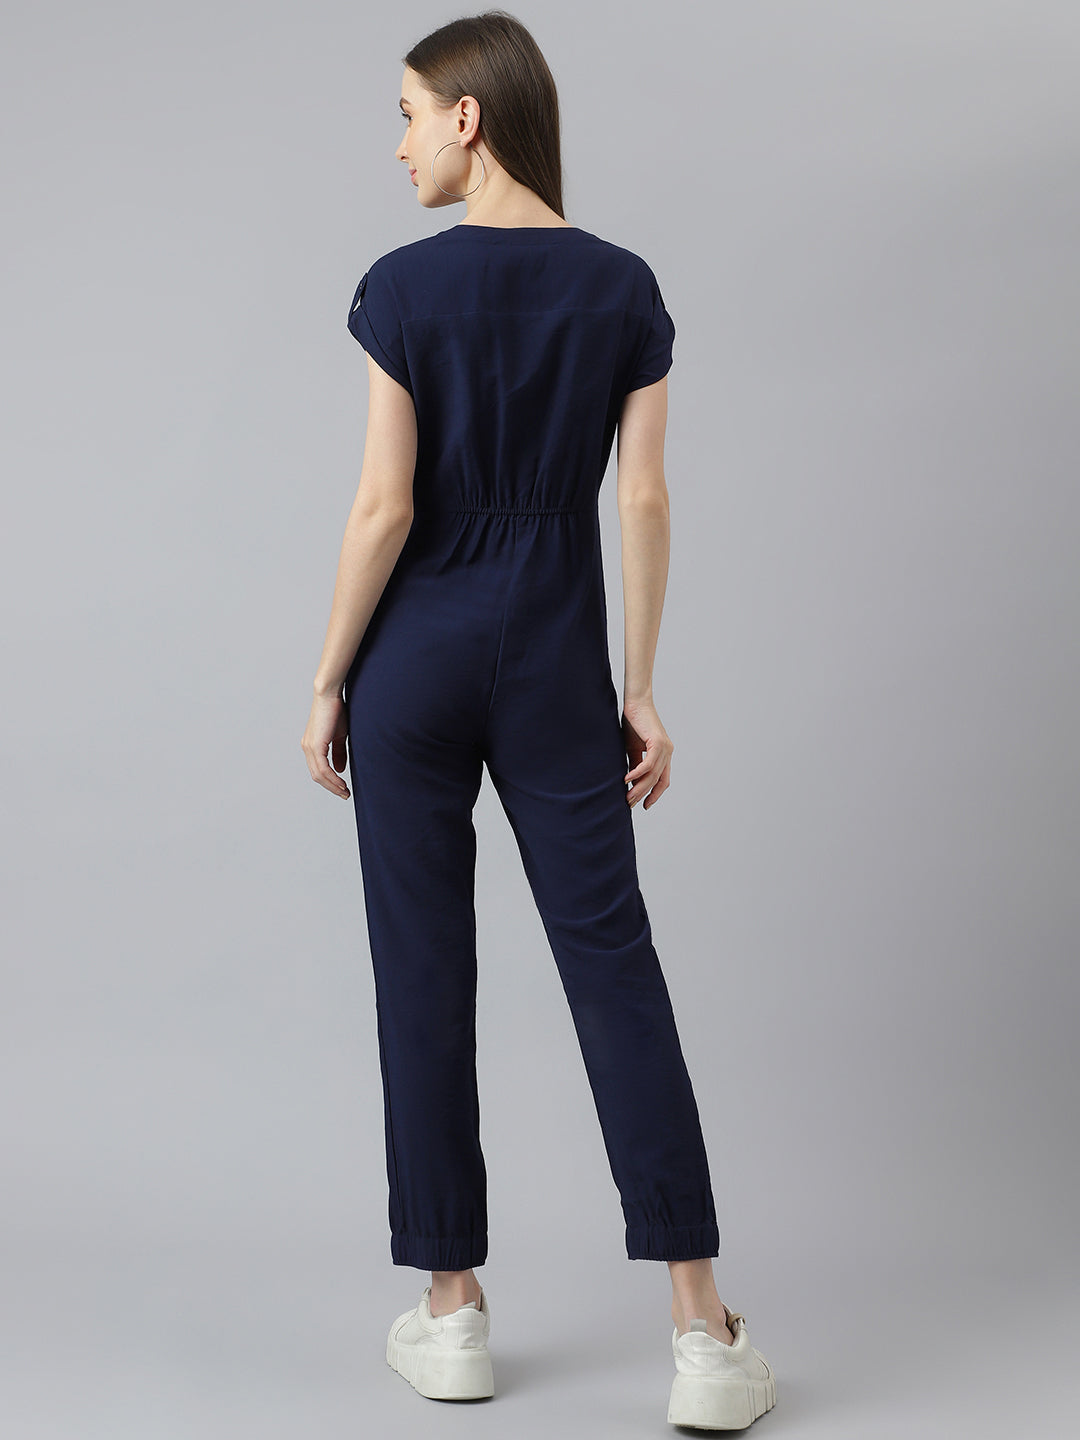 Blue Navy Half Sleeve V-Neck Women Jump Suit For Casual